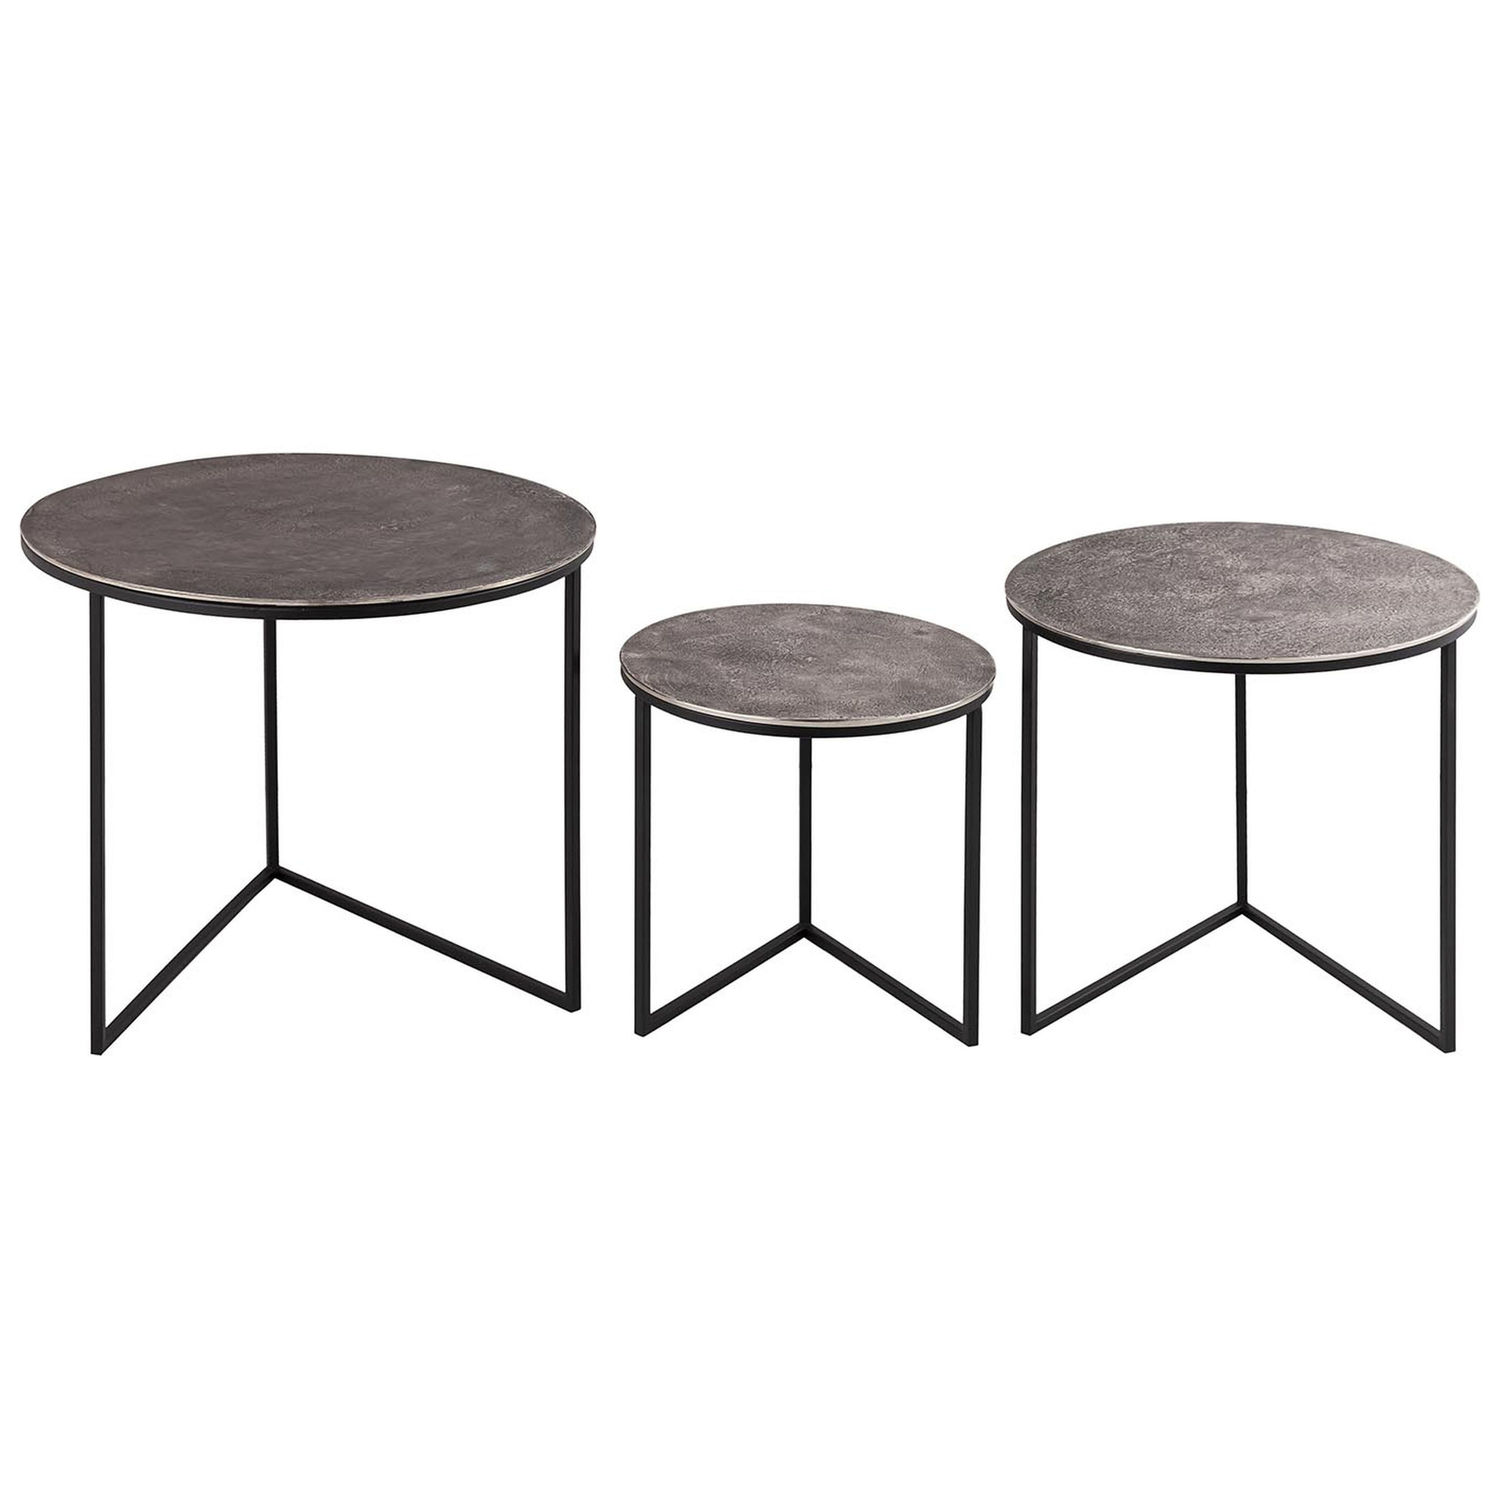 Farrah Collection Set of Three Round Tables - Image 1